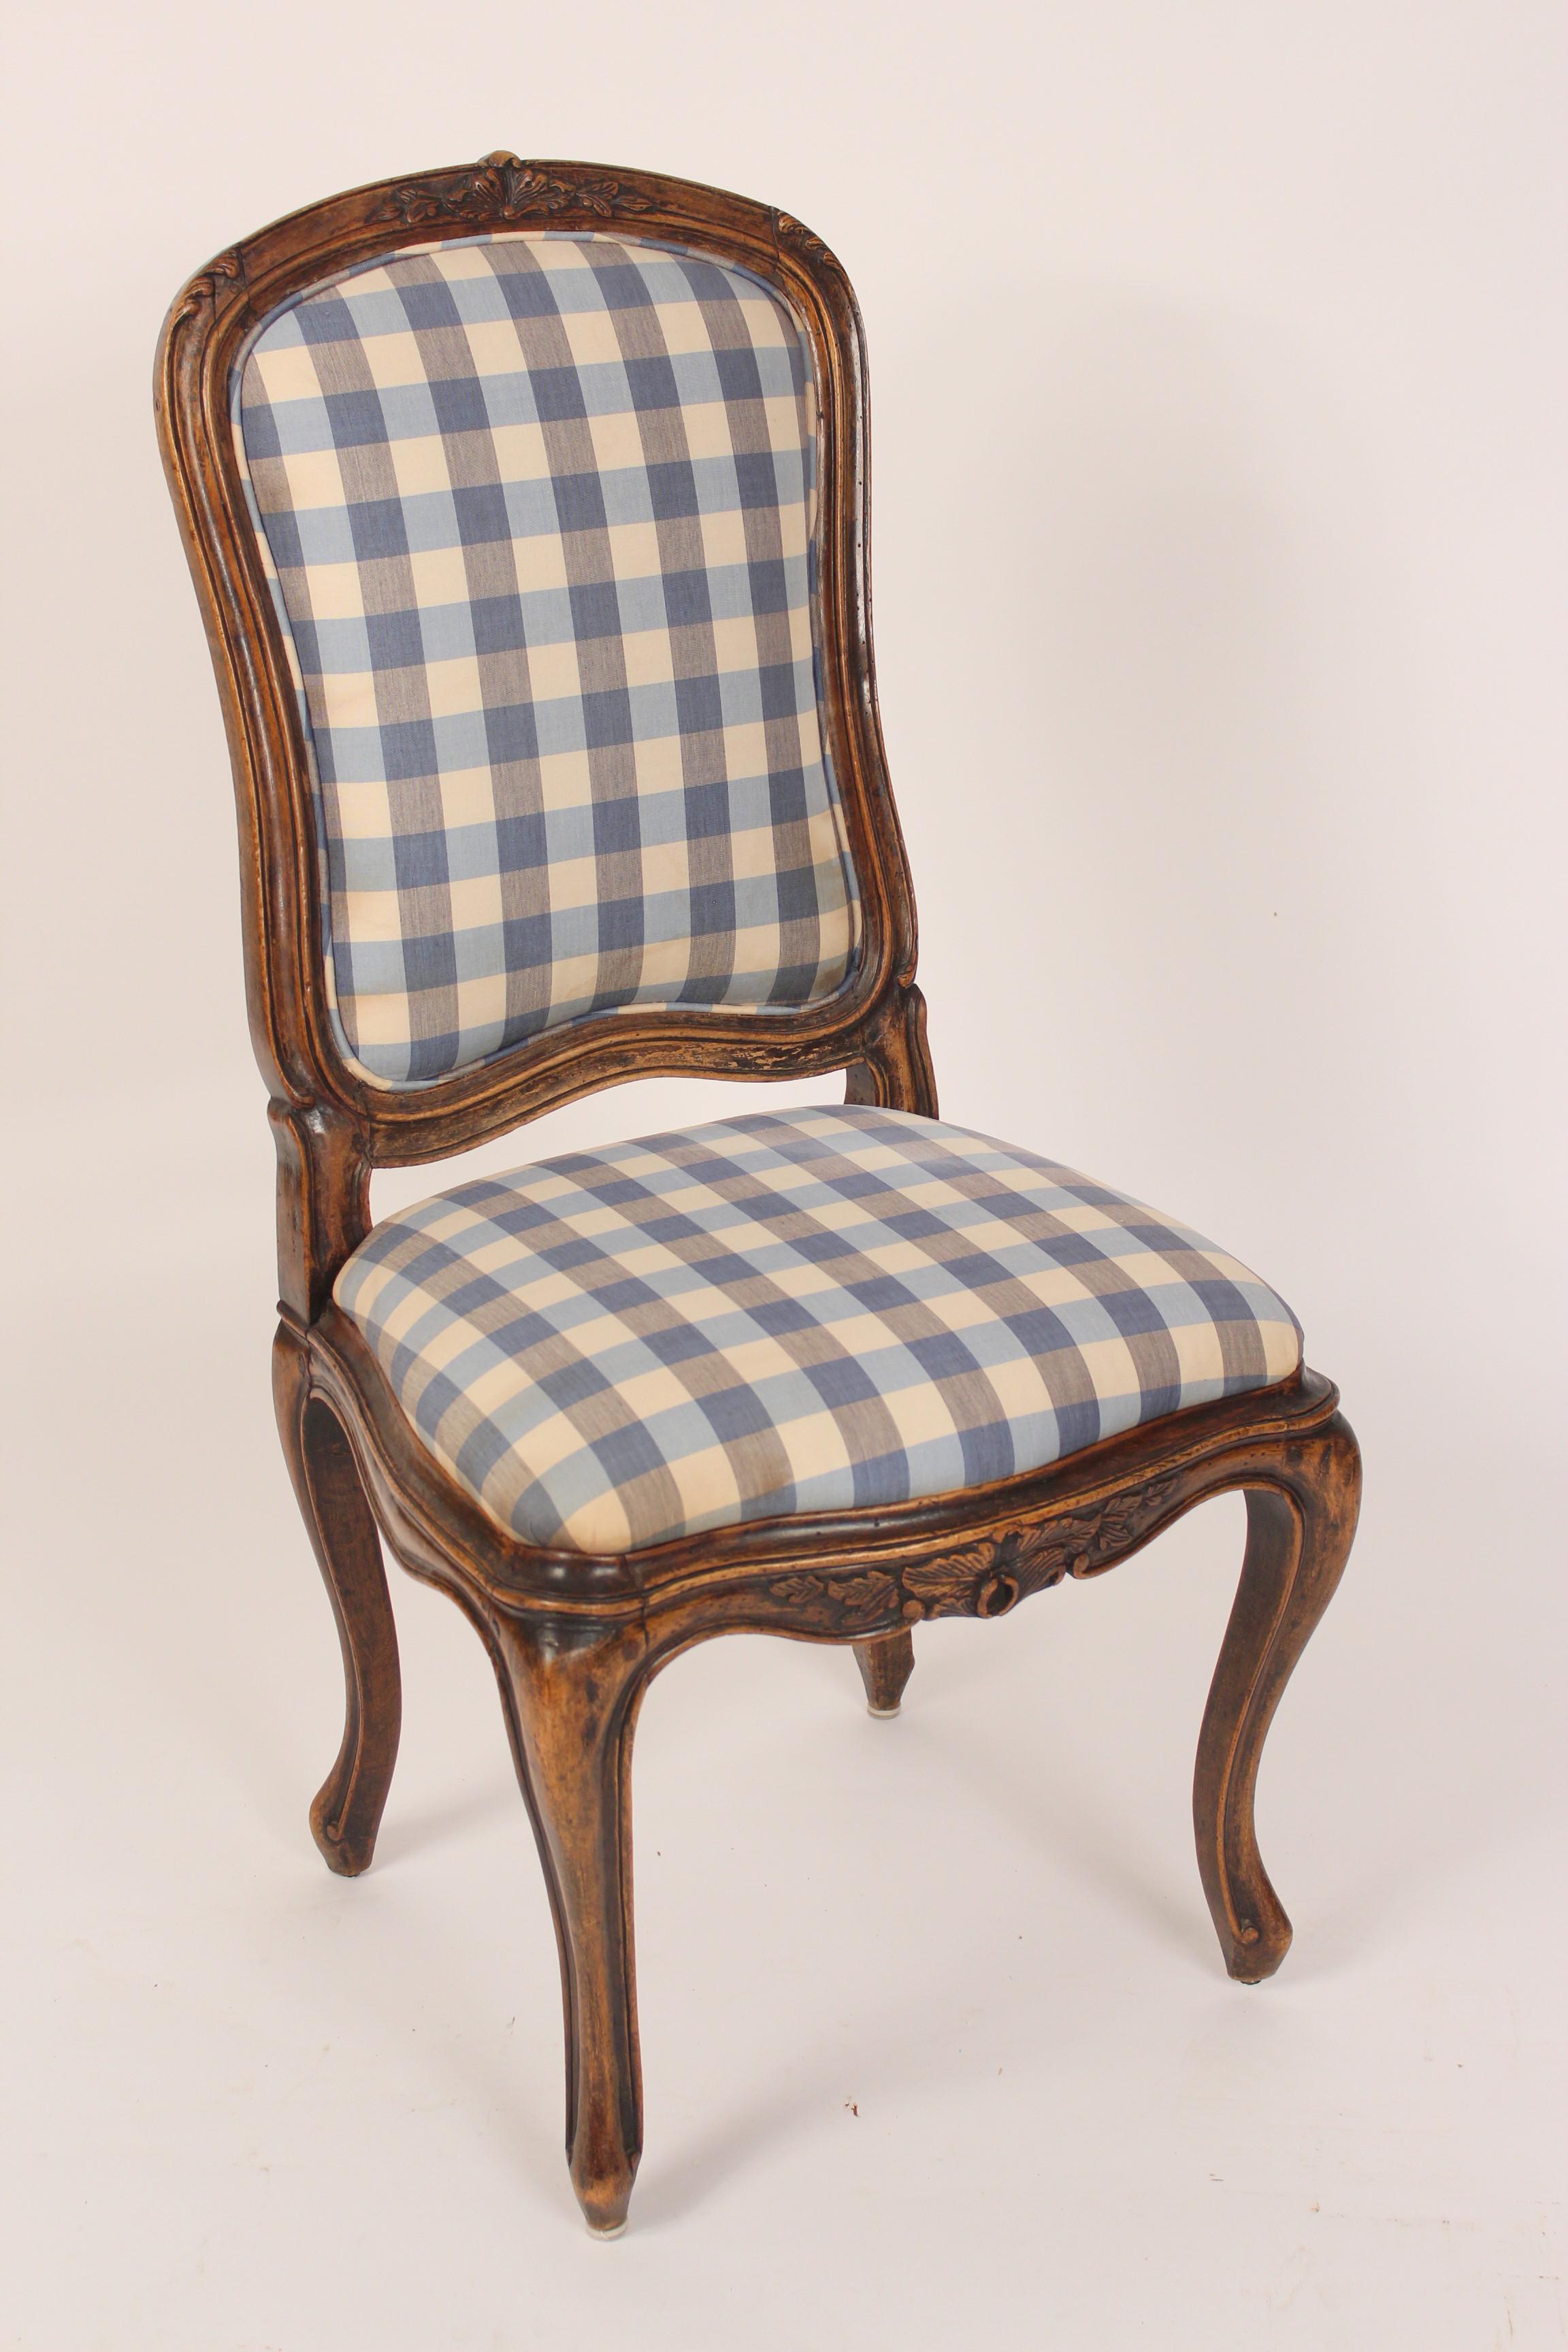 Set of 8 antique Louis XV provincial style beechwood dining room chairs, 19th century. These chairs have an excellent old patina. The chair seat measures 16